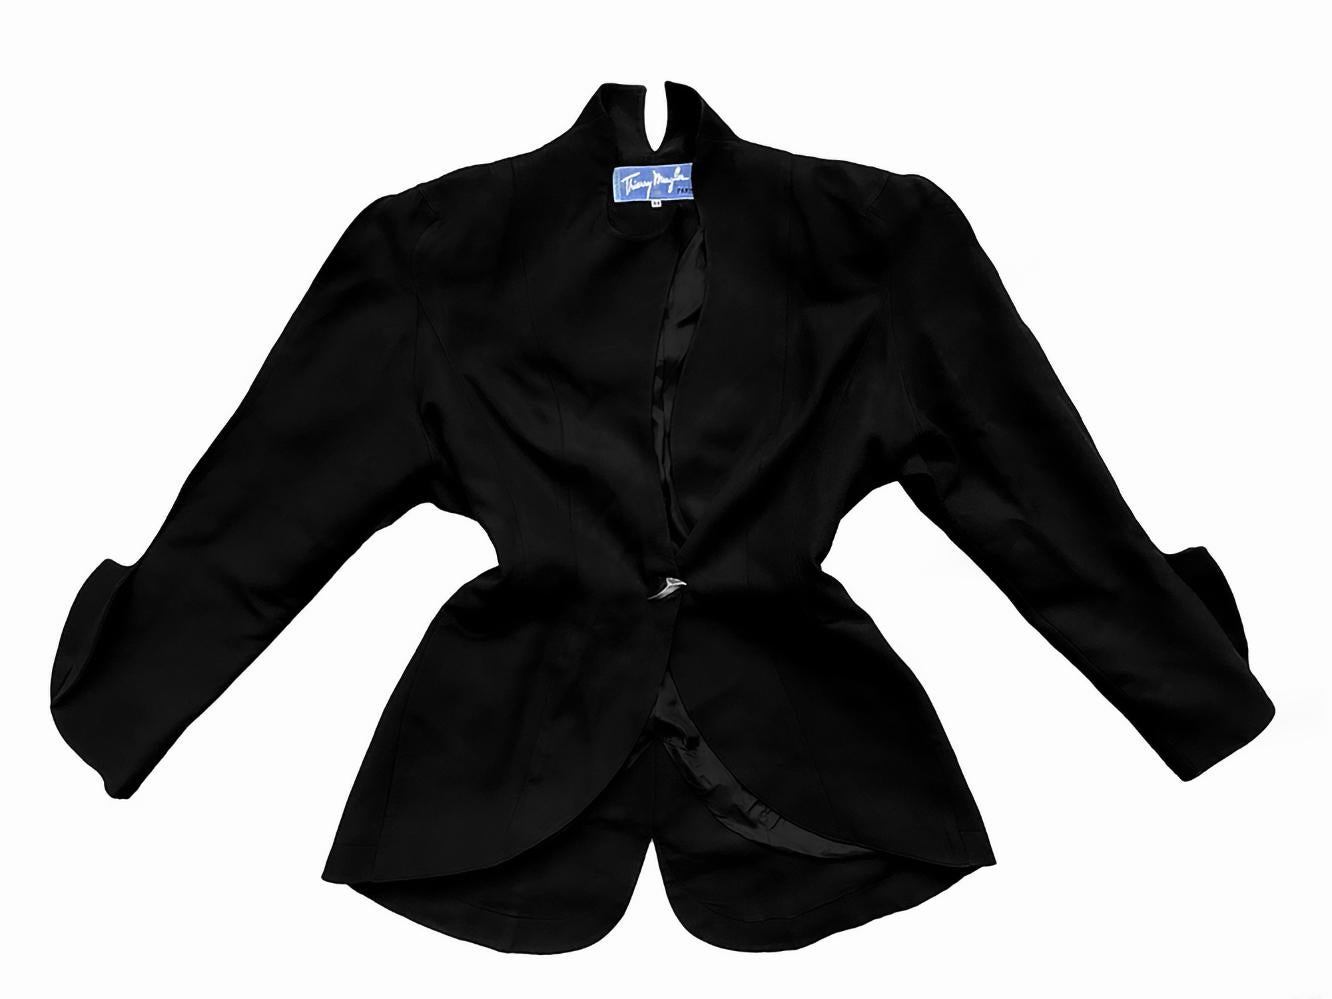 Thierry Mugler SS 1989 Les Atlantes Jacket Black Dramatic Sculptural Archive For Sale 4